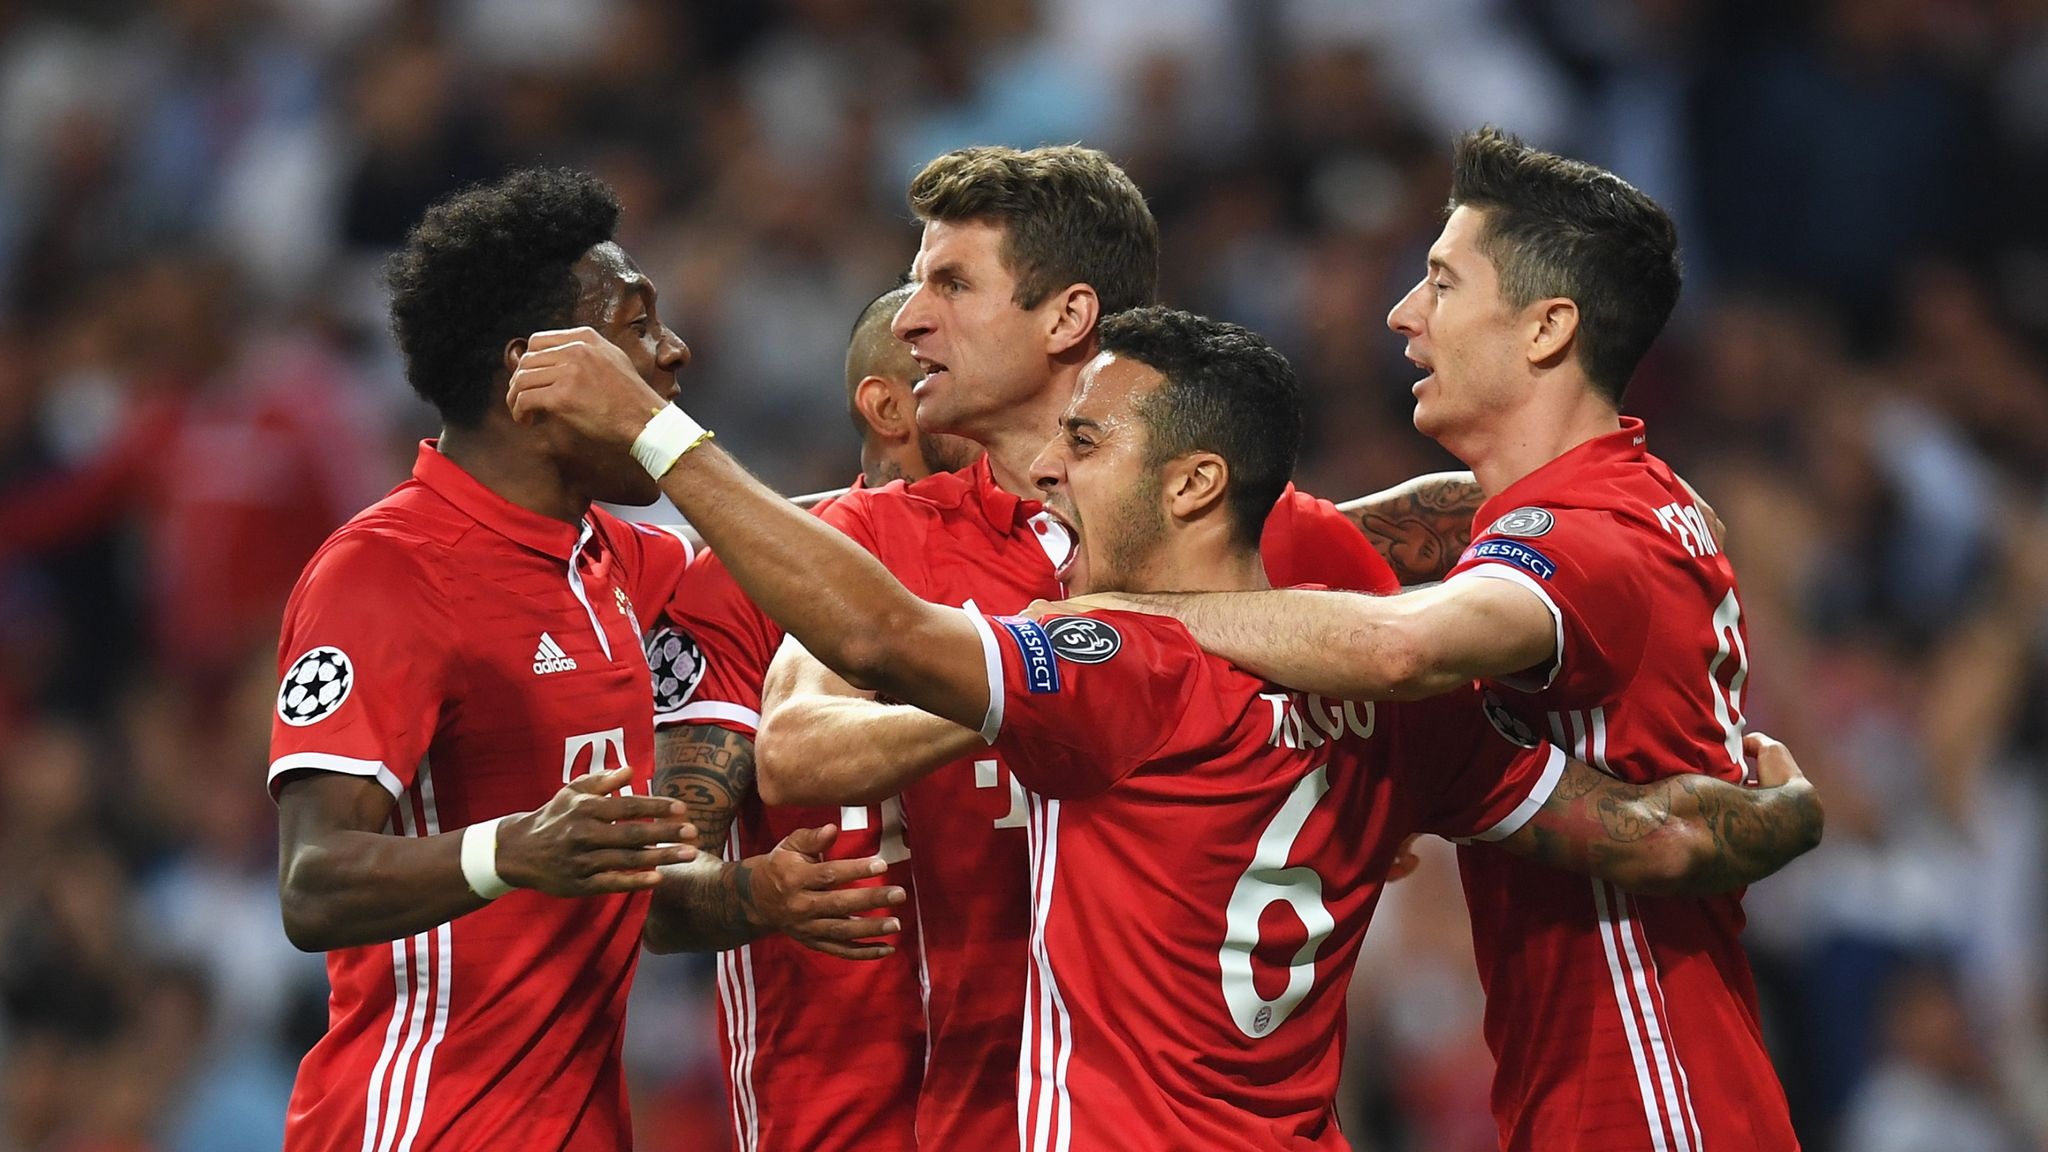 Real Madrid 4 2 Bayern Munich Agg 6 3 Aet Cristiano Ronaldo Hat Trick Fires Real Through 6832